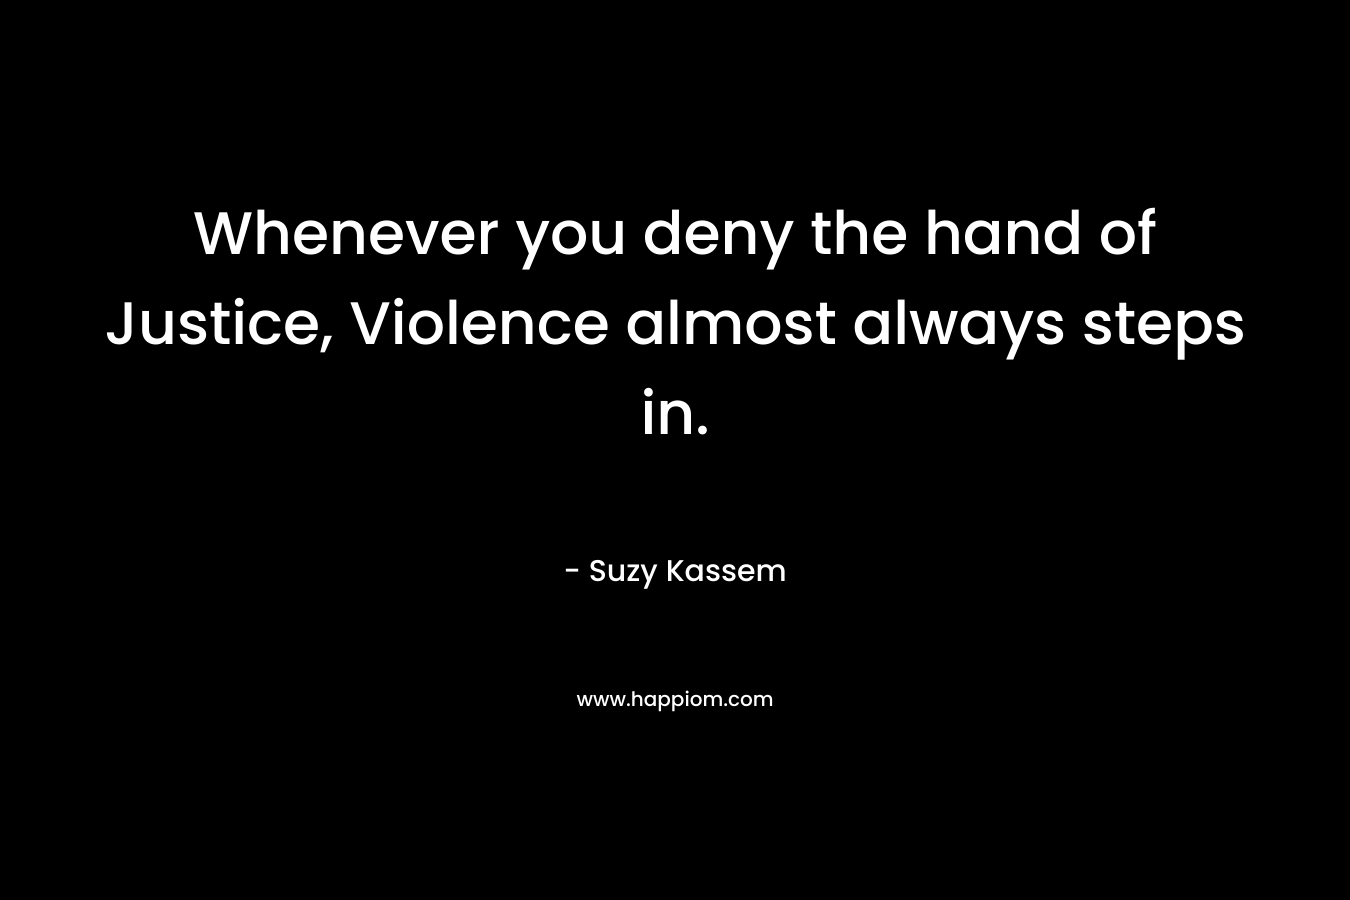 Whenever you deny the hand of Justice, Violence almost always steps in.